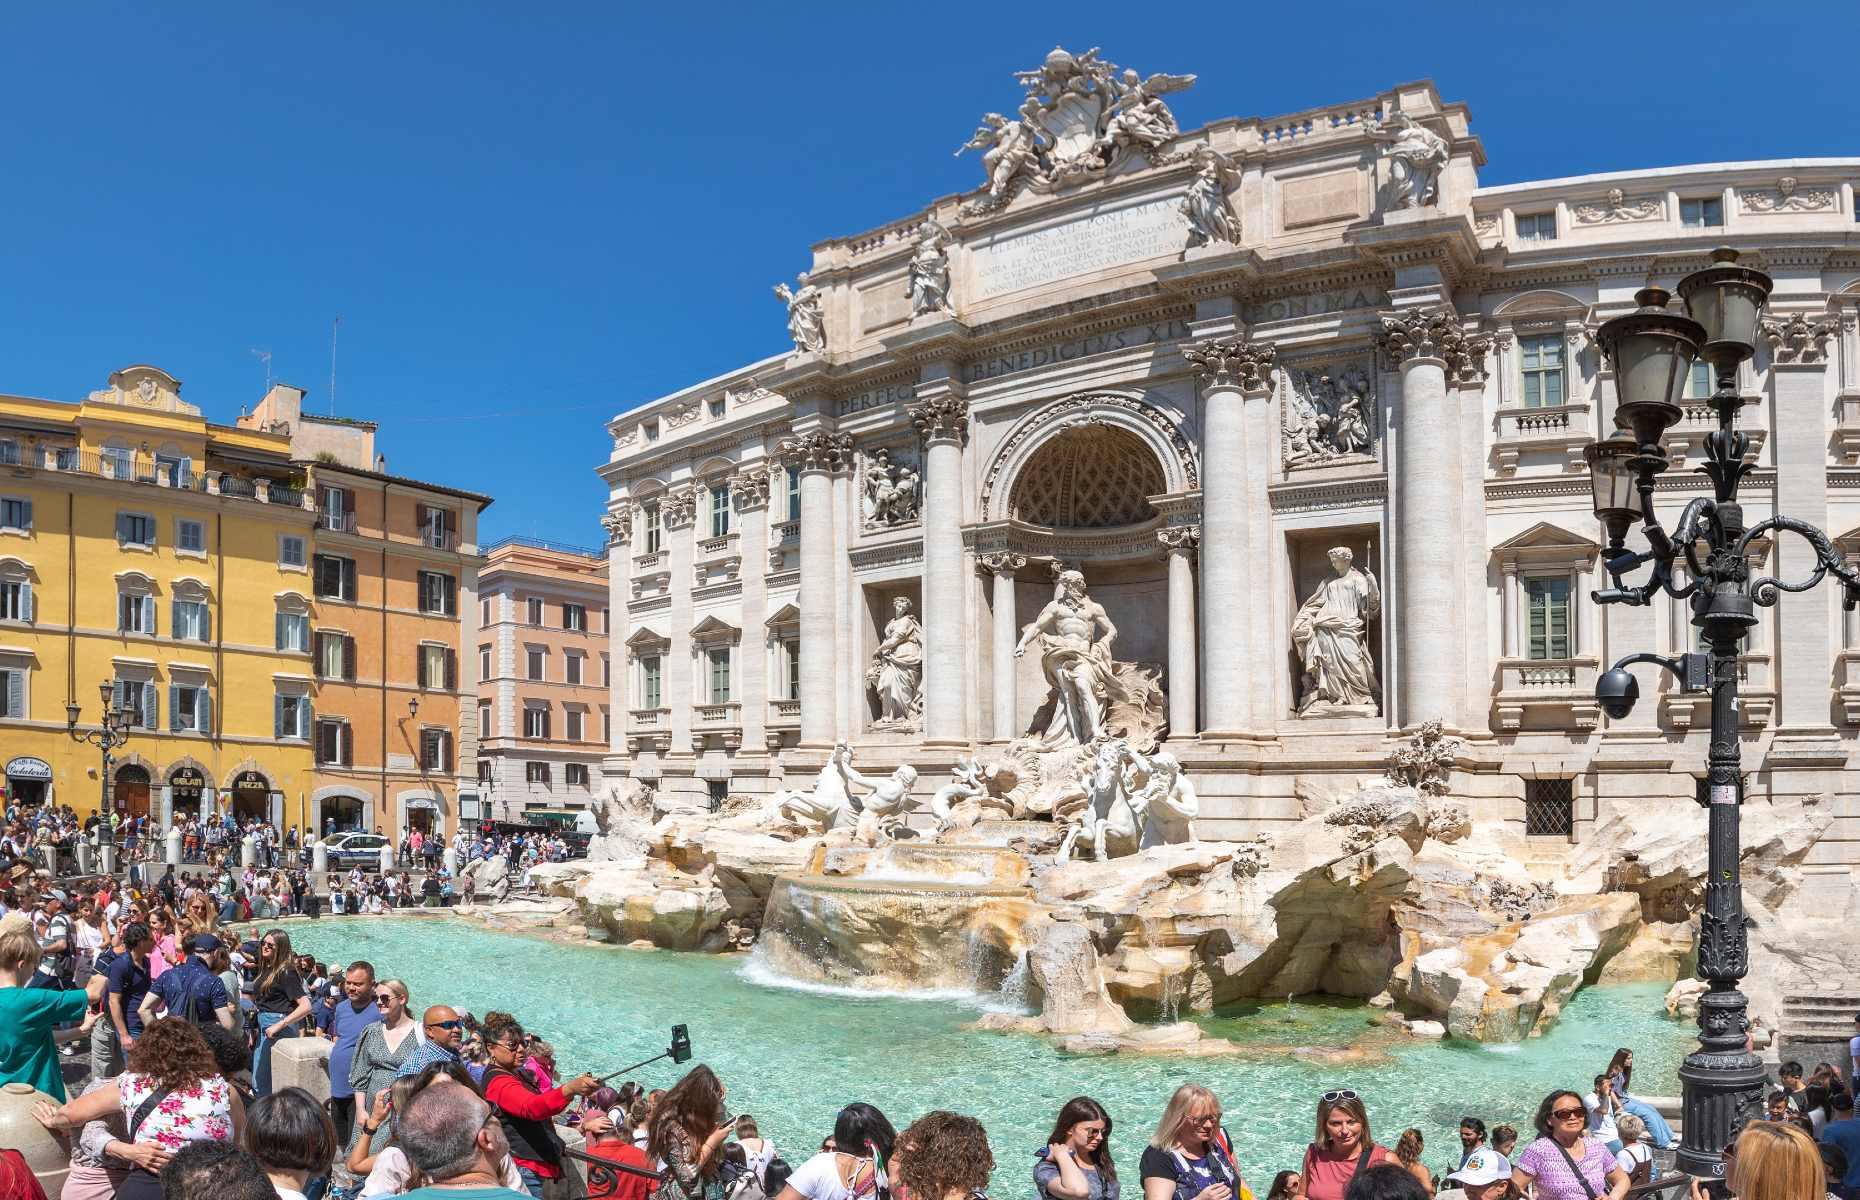 <p>Another day, another trial by TikTok. In July 2023, a woman was videoed walking across the rocks of Rome’s iconic Trevi Fountain to reach one of its cascades, where she proceeded to fill her water bottle with the famous waters. Just when it looks like she’s getting away with it, a guard can be heard blowing their whistle before striding towards the trespasser. After what appeared to be quite a stern chat, the guard led the woman away. It’s not known if she was later prosecuted for entering the Trevi Fountain, which typically carries a substantial fine.</p>